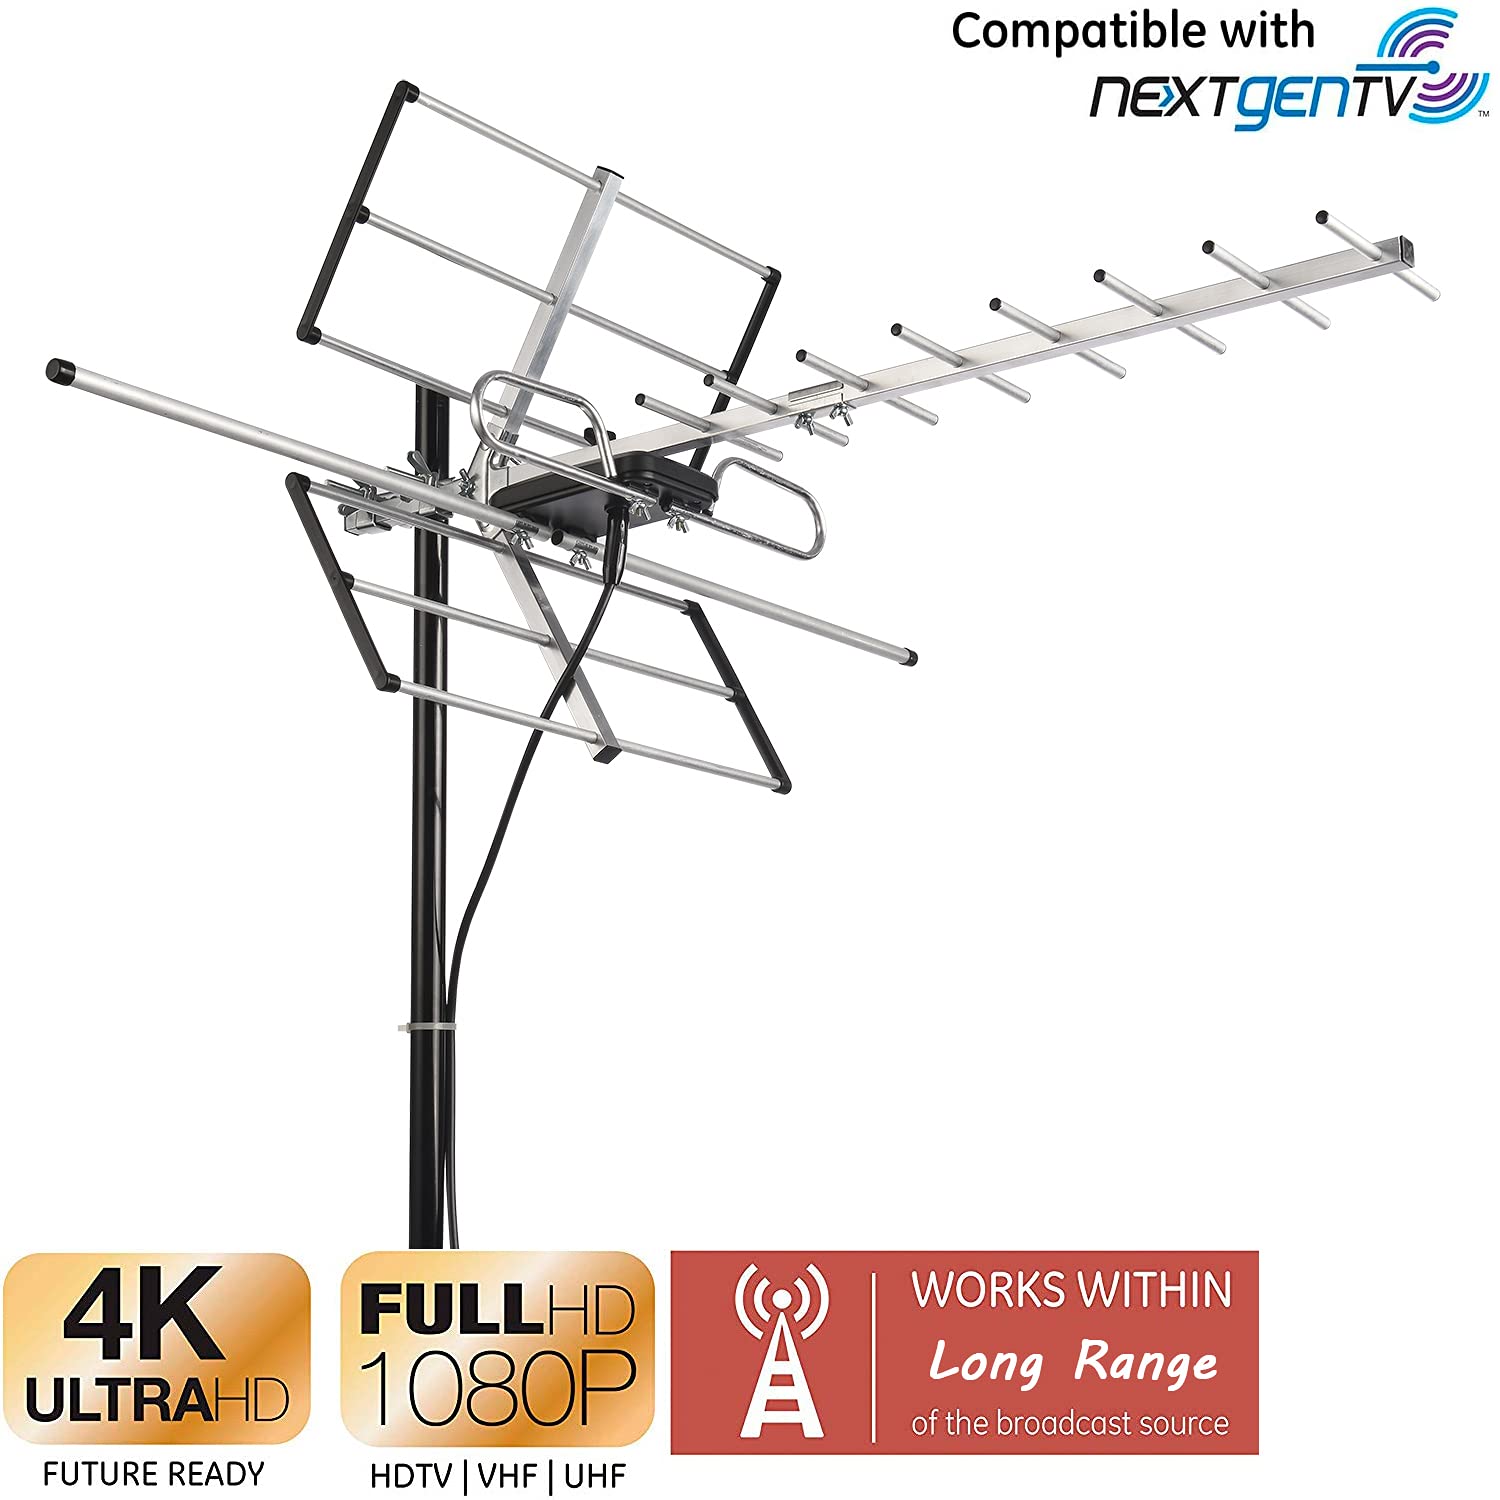 PIBIDI Outdoor Digital Amplified Yagi HDTV Antenna, Built-in High Gain and Low Noise Amplifier, 40FT RG6 Coaxial Cable, 120 Miles Range with UHF and VHF Signal